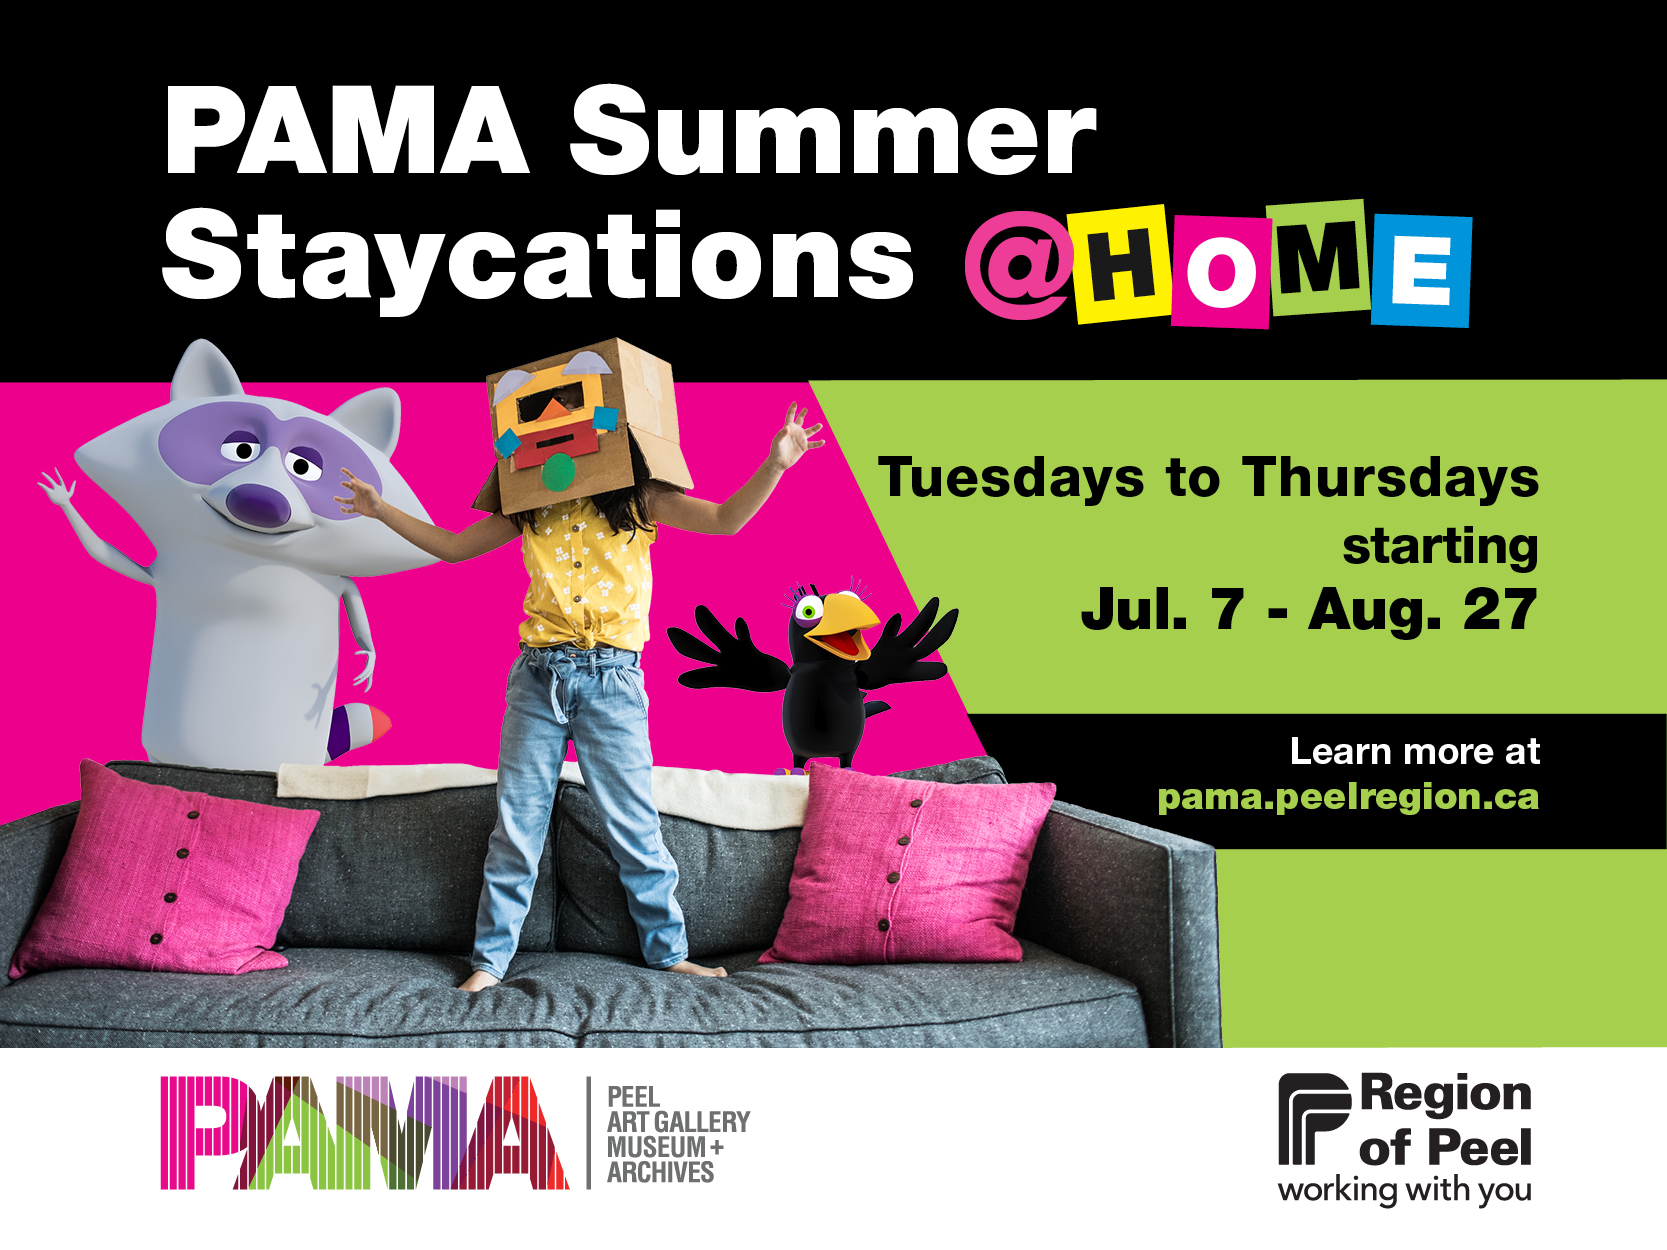 PAMA: Summer Staycations @ Home